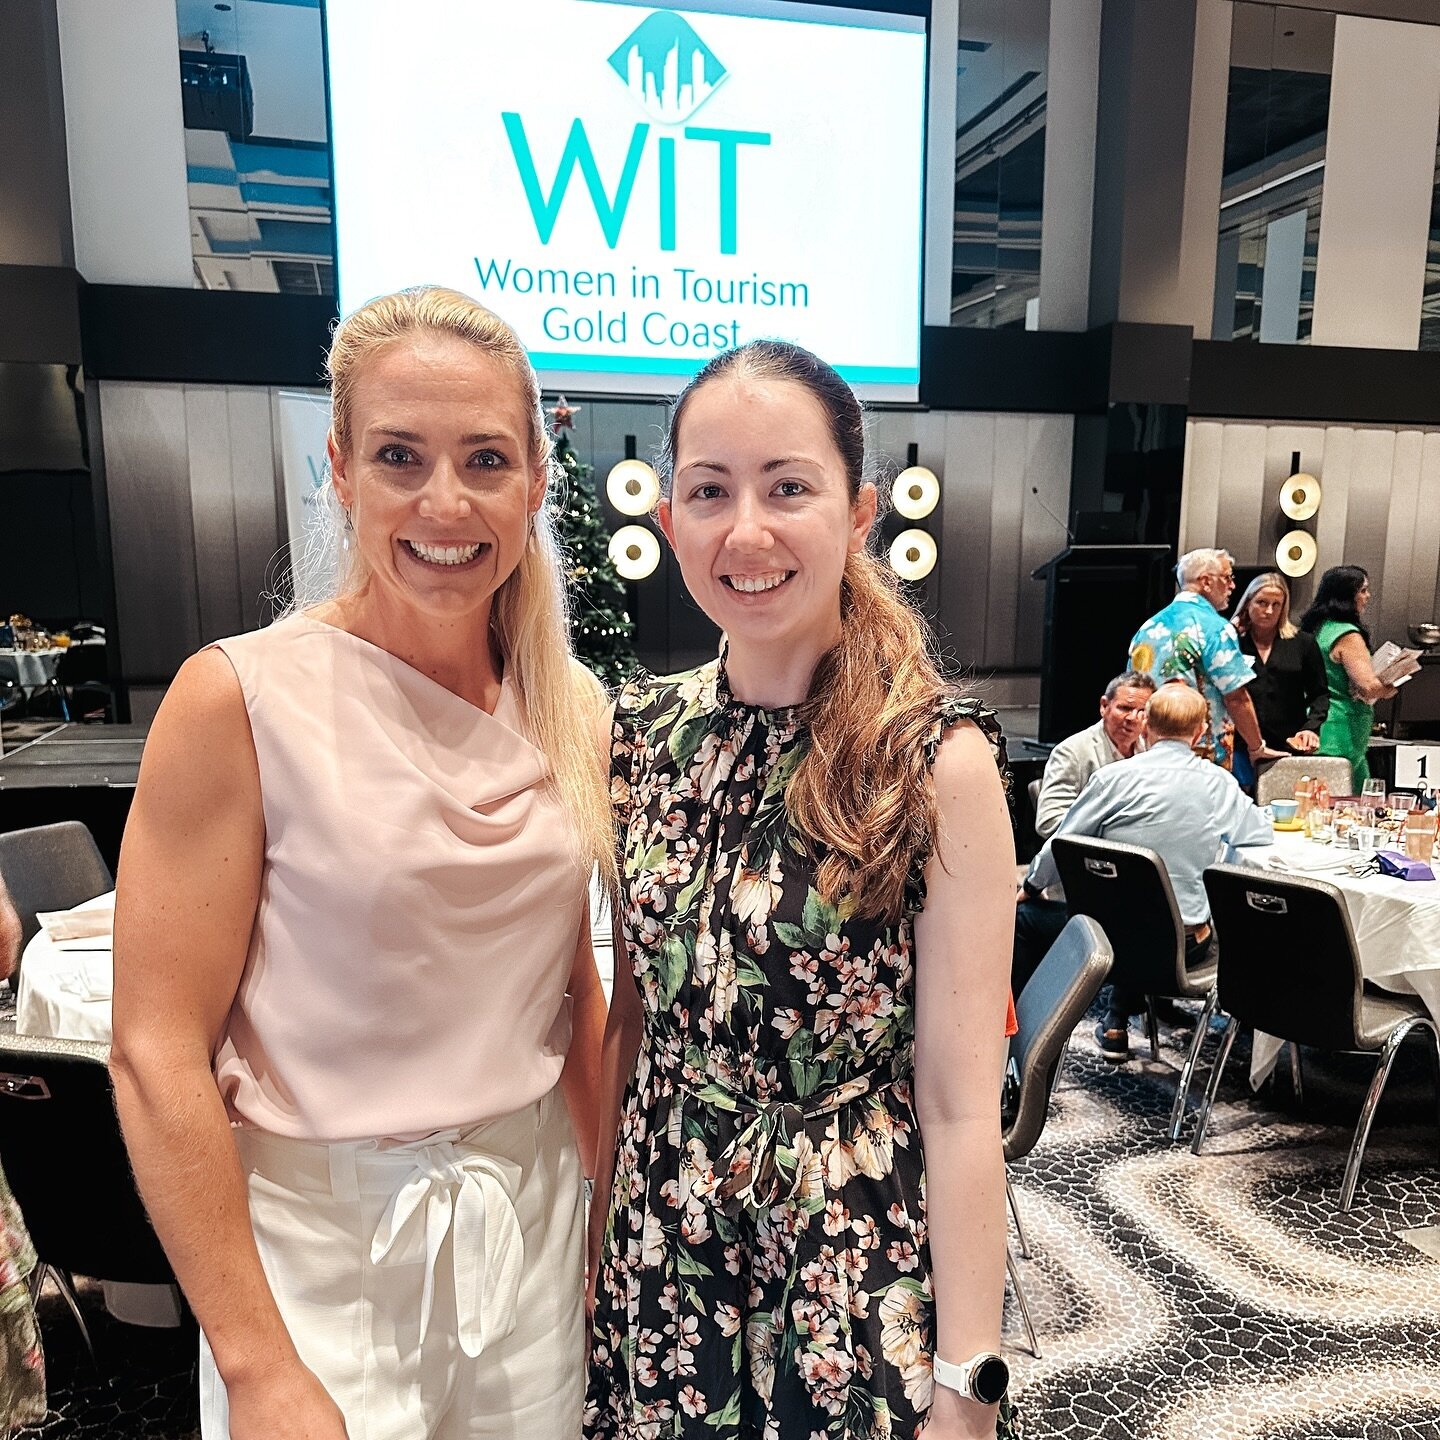 Big thank you to @womenintourismgc for a fantastic Christmas networking breakfast 🎄 I absolutely loved the key message of &lsquo;Be the Change&rsquo; - just what&rsquo;s needed as i&rsquo;m embarking on my new biz adventure ✨

#goldcoastsmallbusines